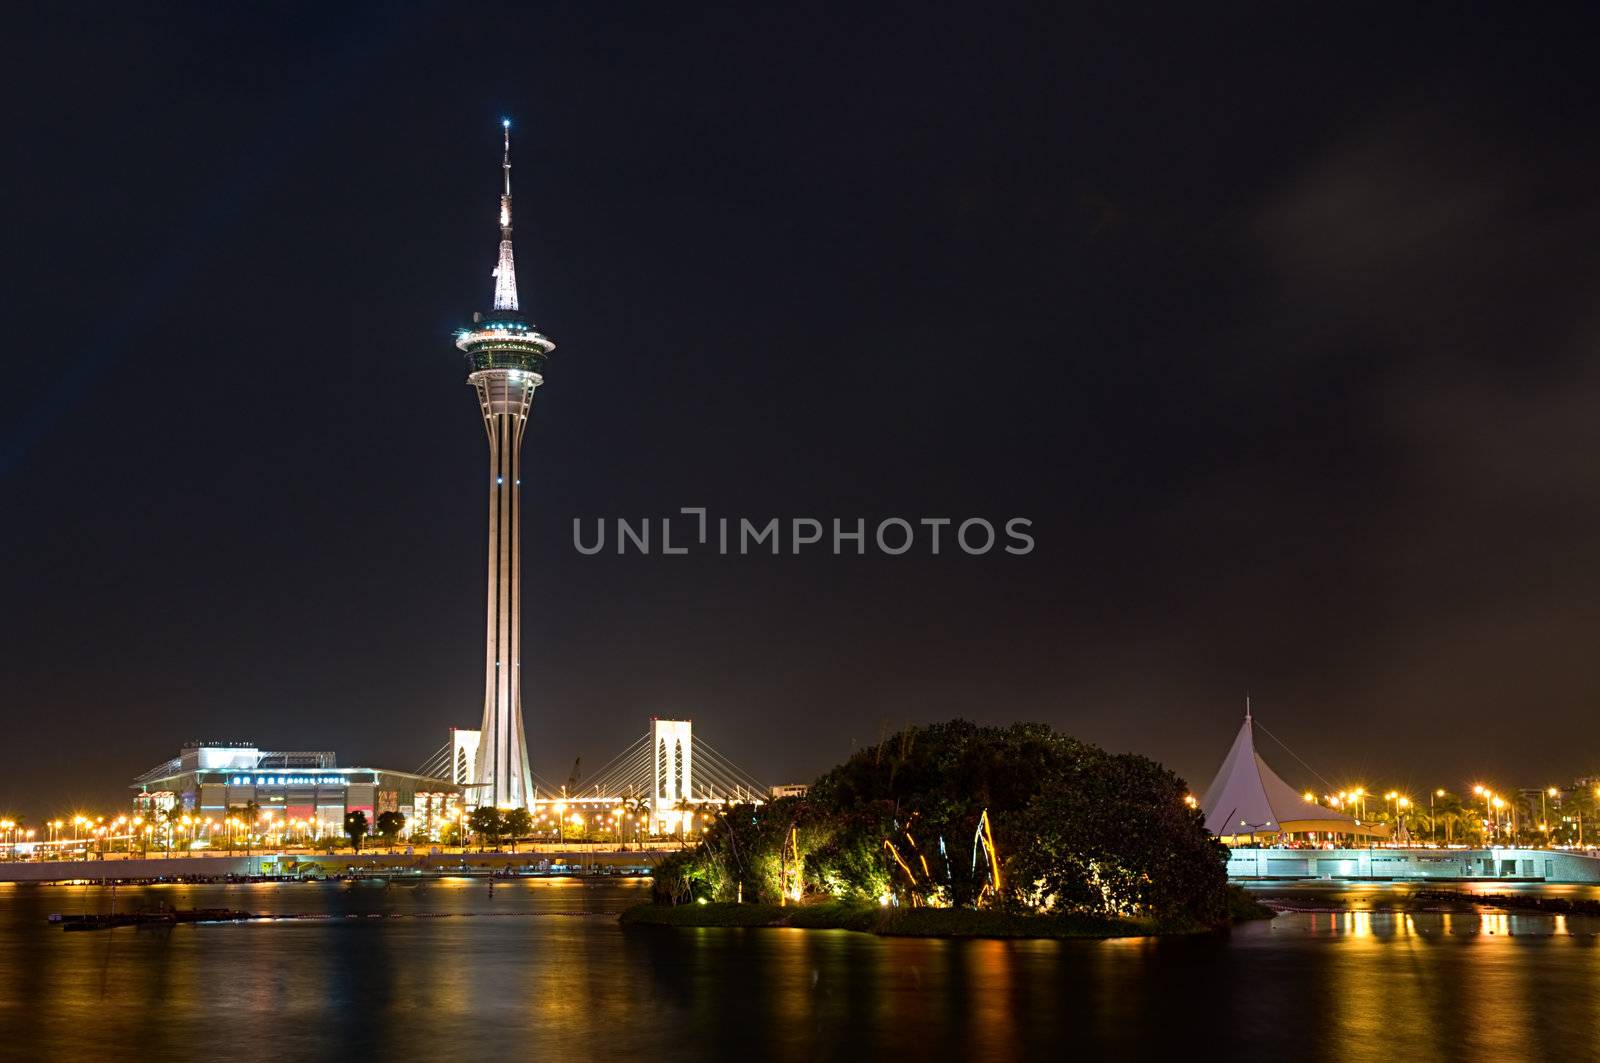 The evening of Macau Tower Convention and Entertainment Center